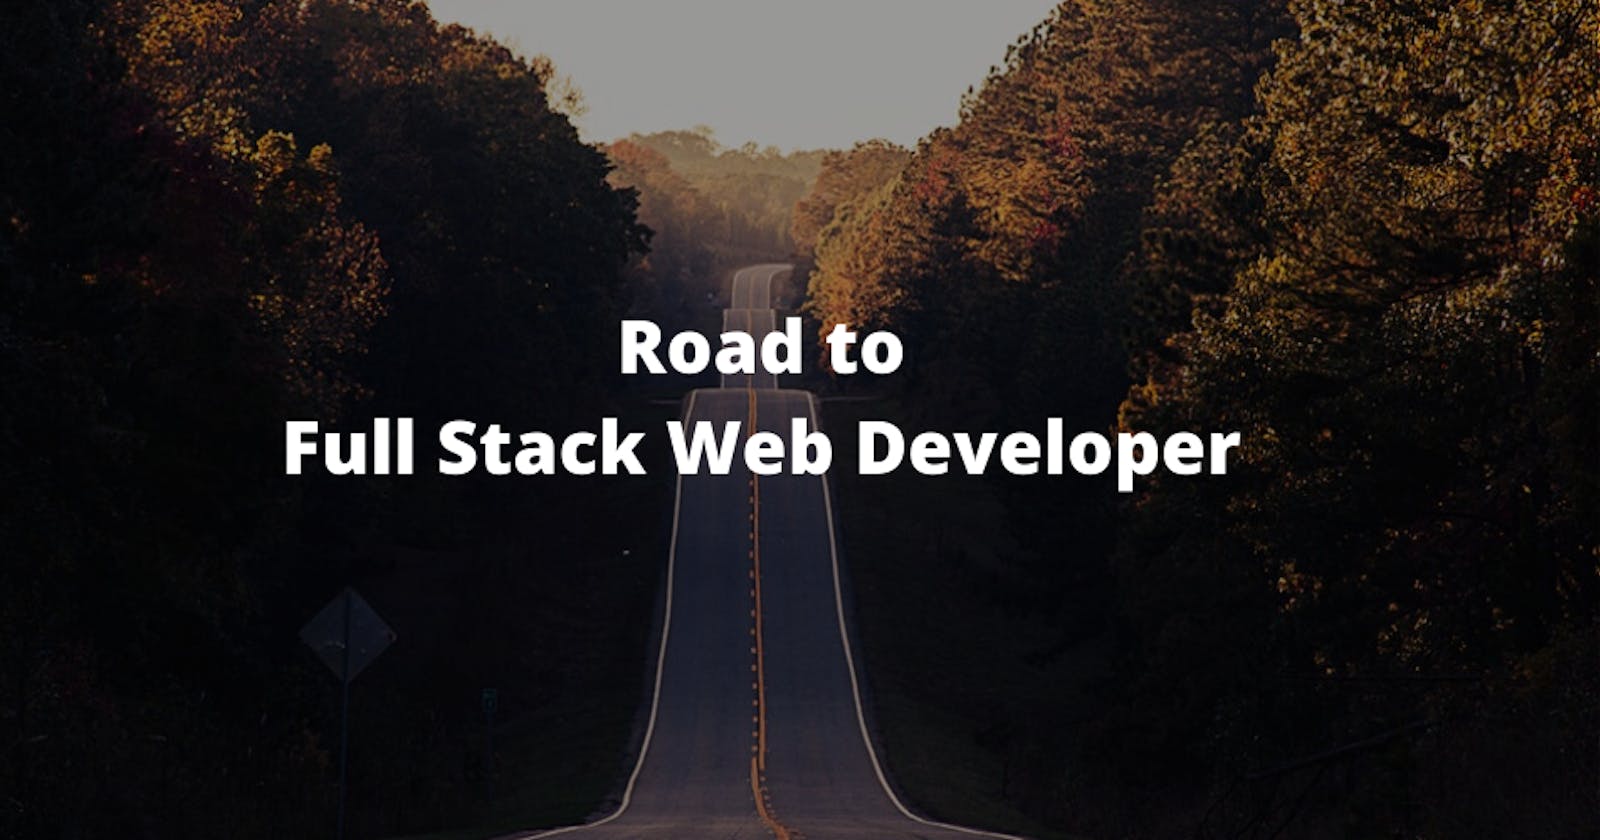 Why do I want to become a Full-Stack Web Developer?